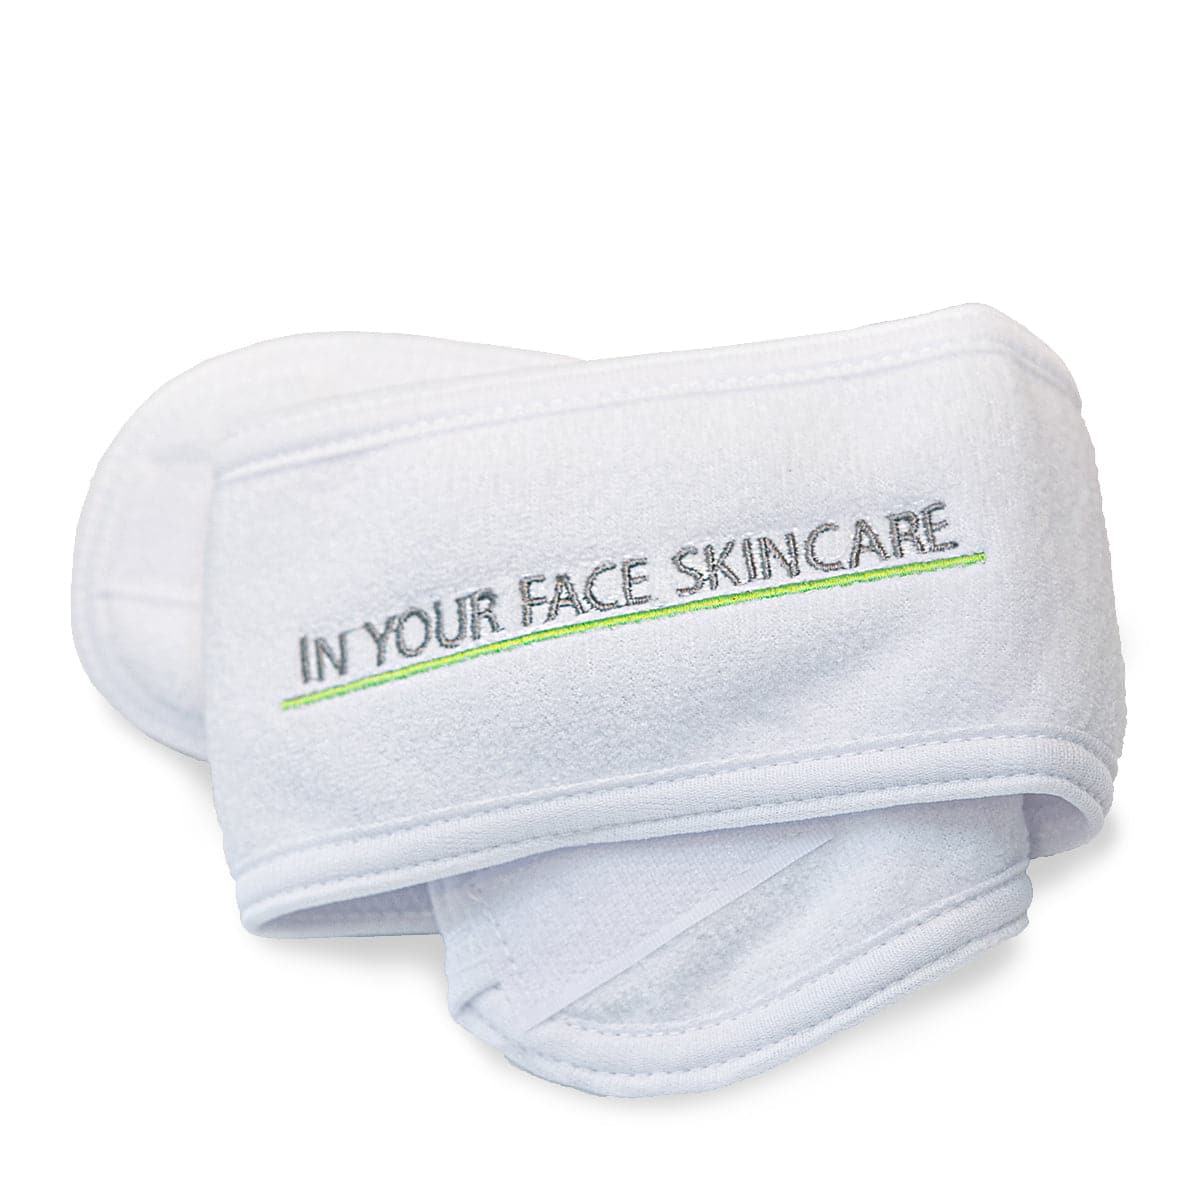 an image of the IN YOUR FACE SKINCARE velcro hair wrap on a white background